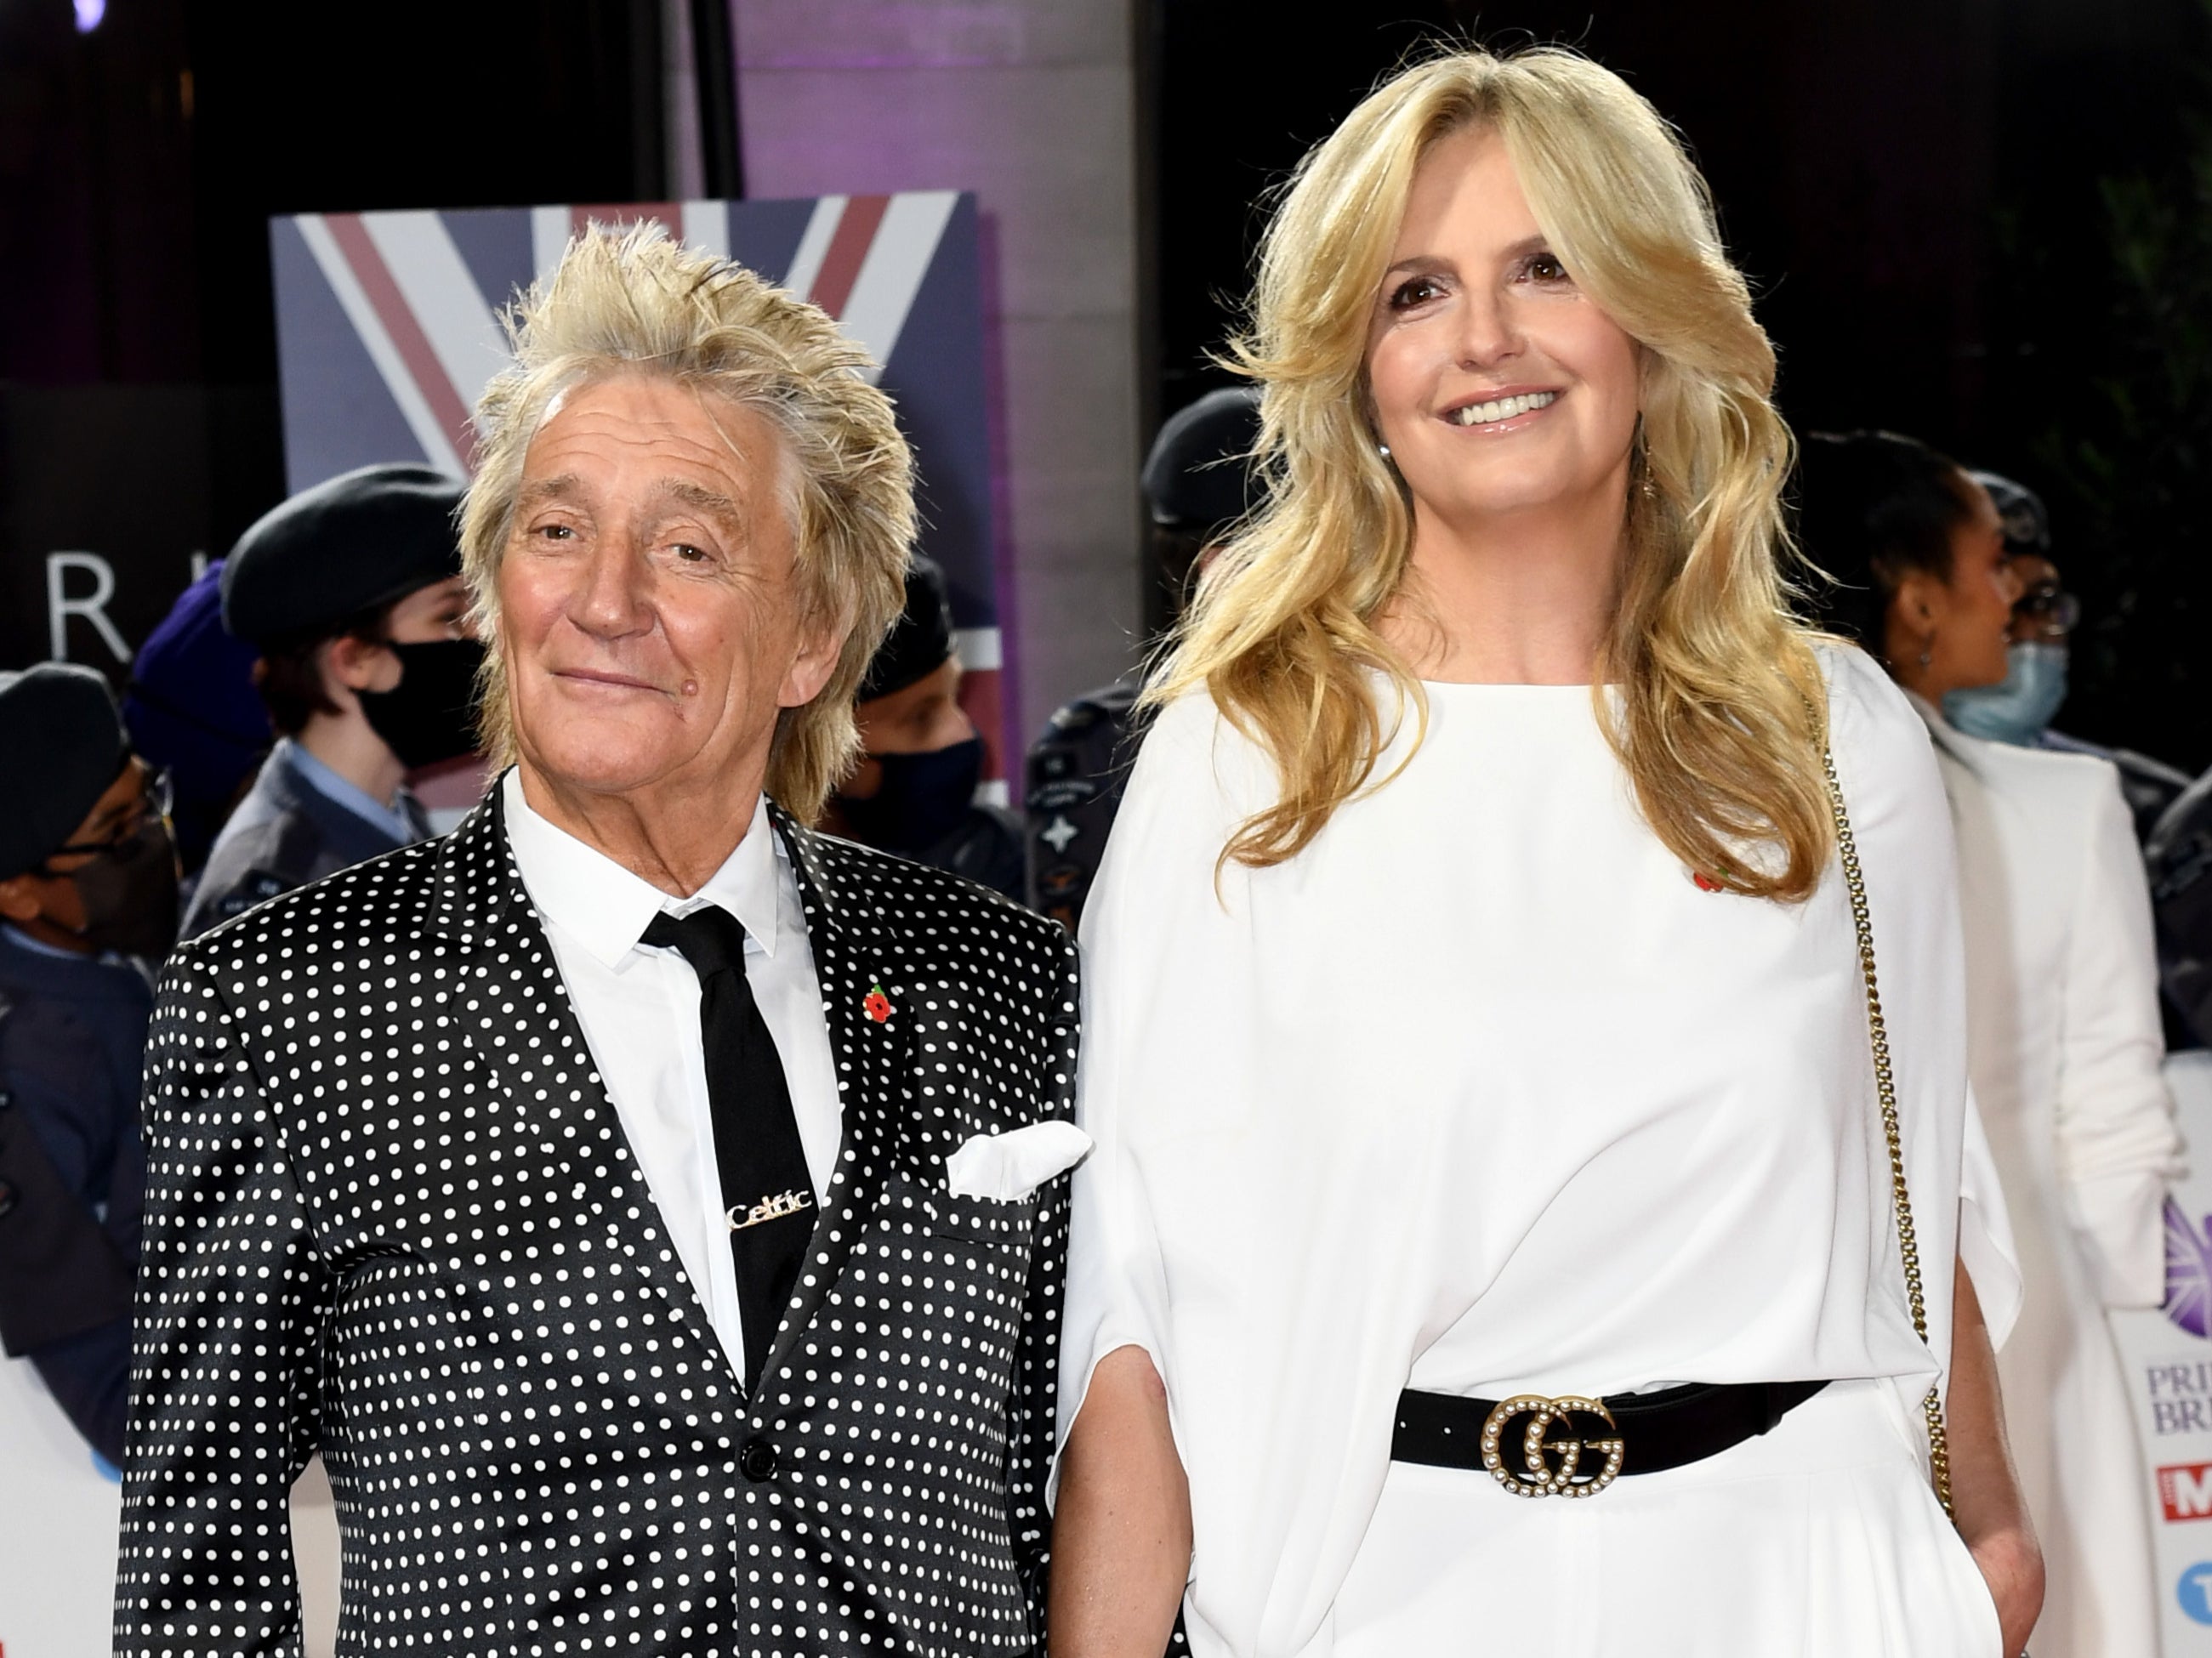 Rod Stewart and Penny Lancaster attend the Pride Of Britain Awards 2021 at The Grosvenor House Hotel on October 30, 2021 in London